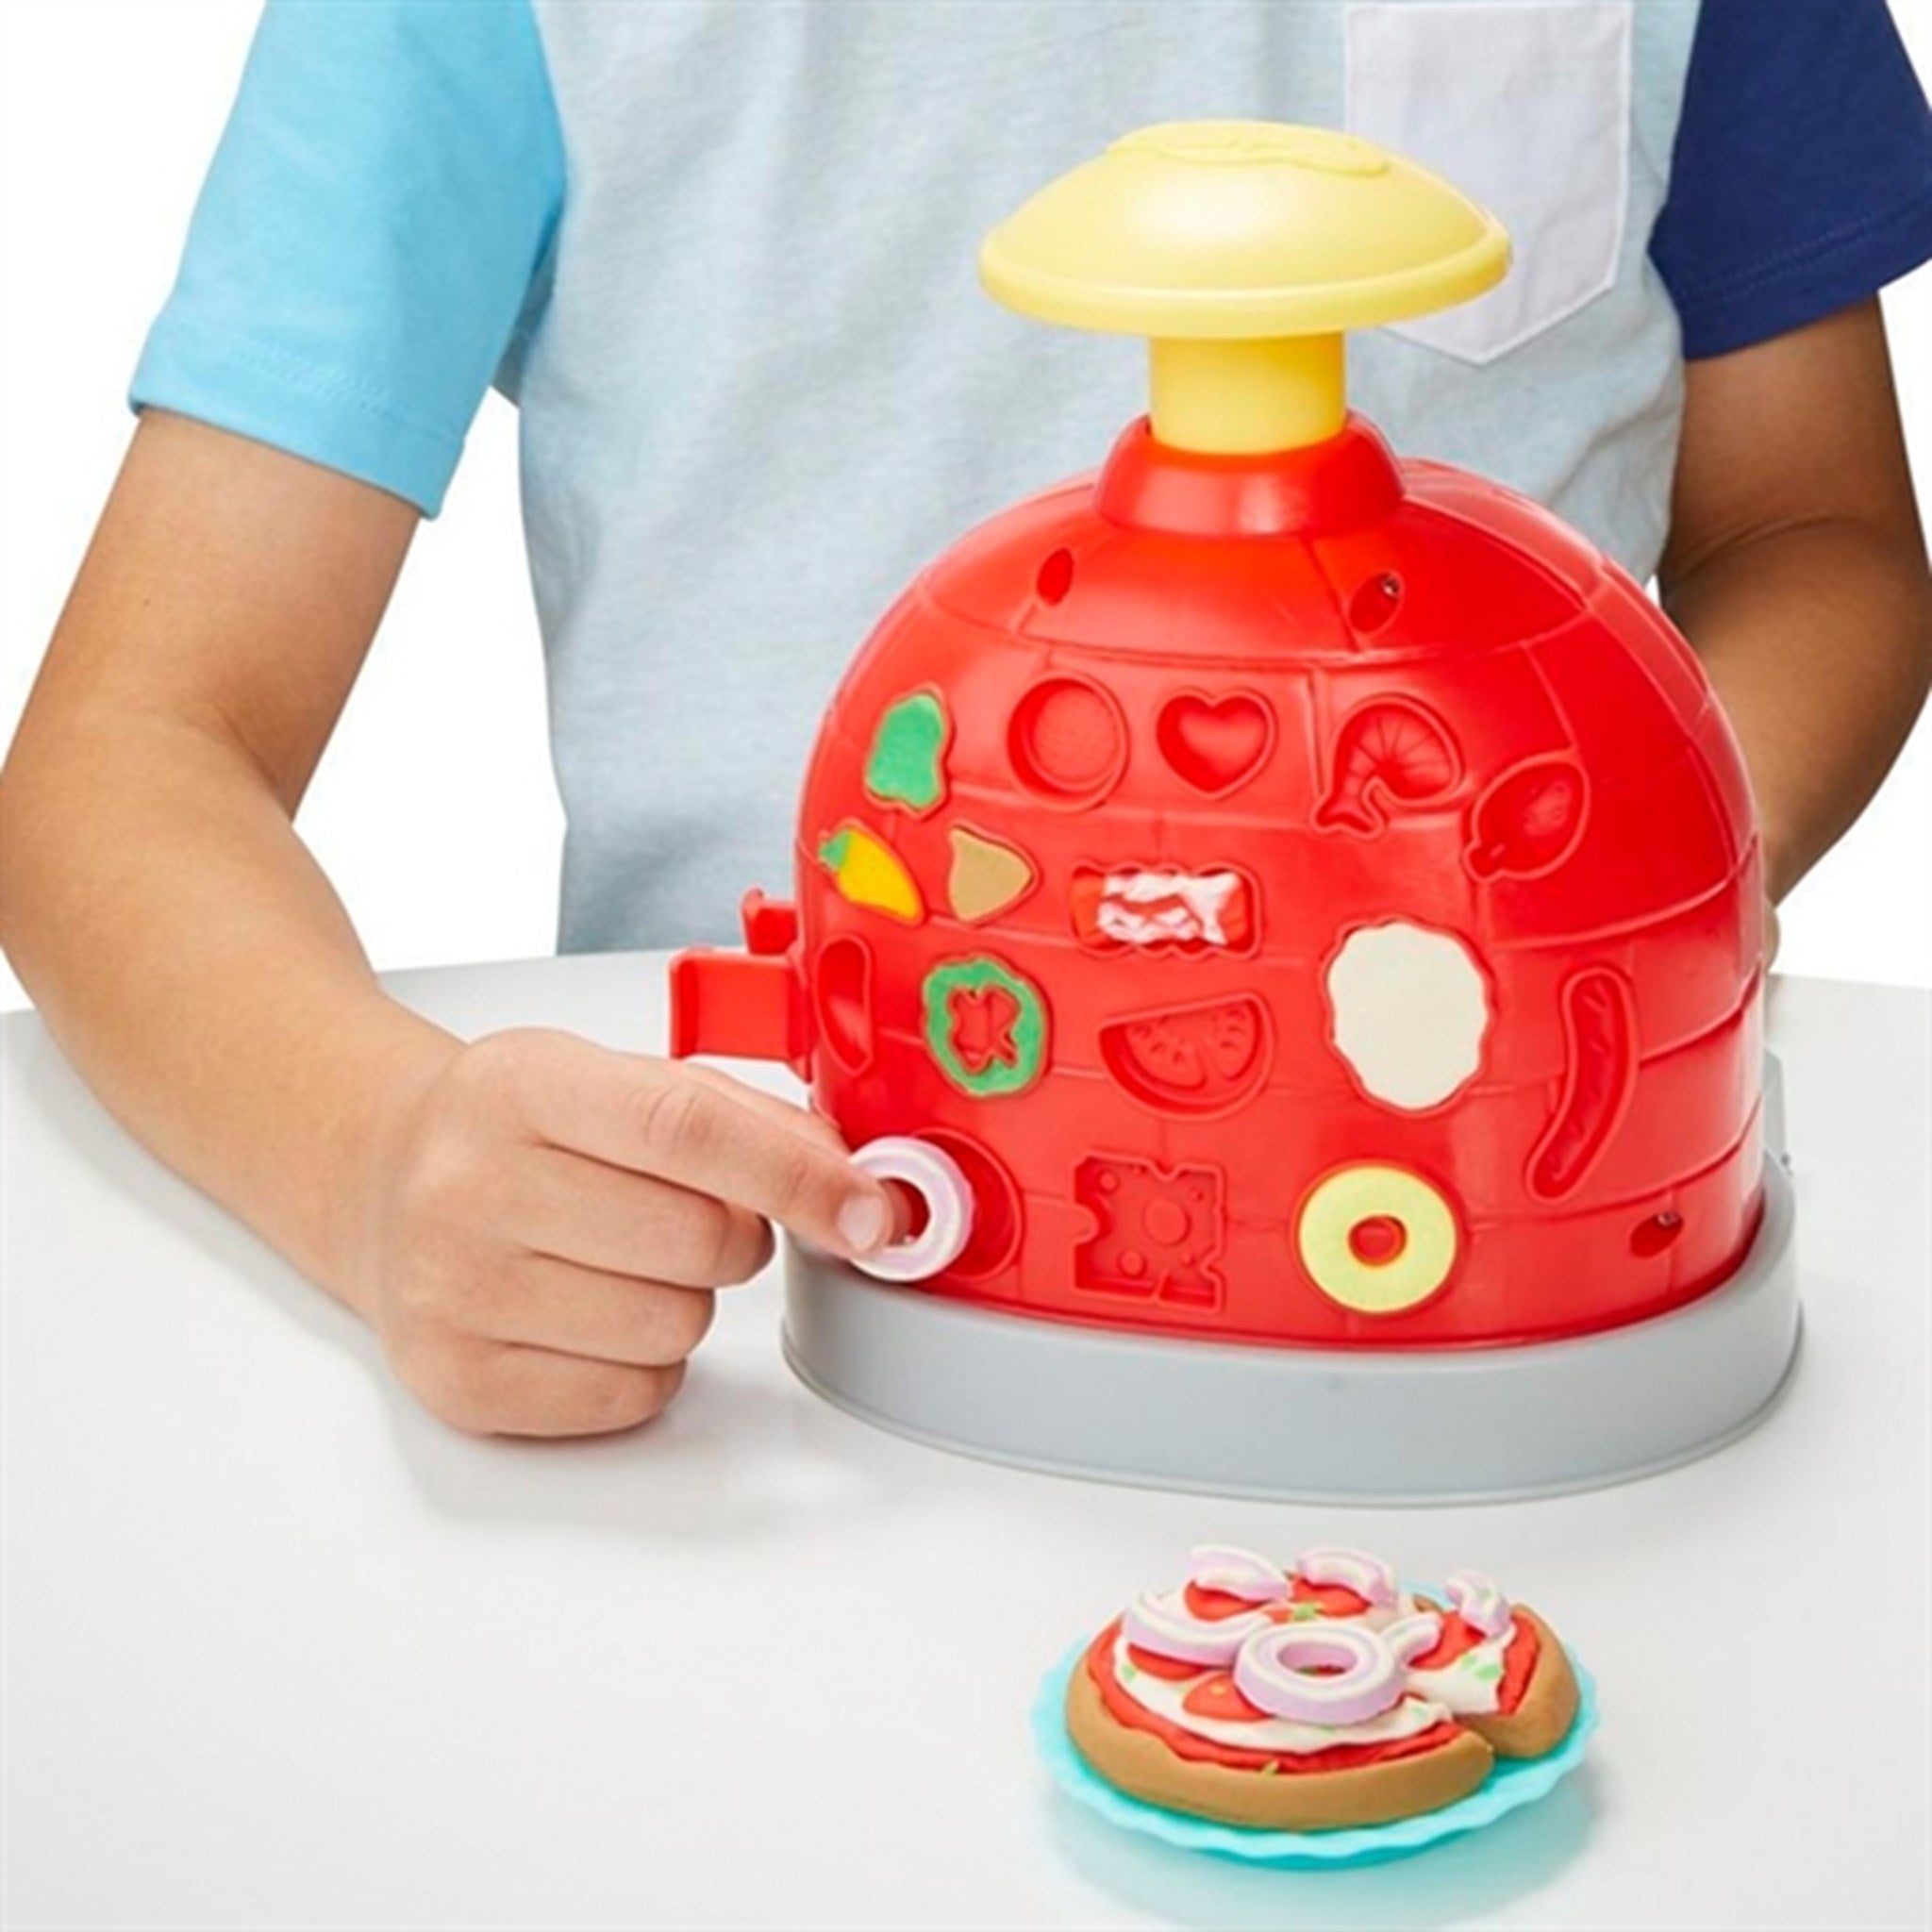 Play-Doh Kitchen Creation - Pizza Oven Playset 4